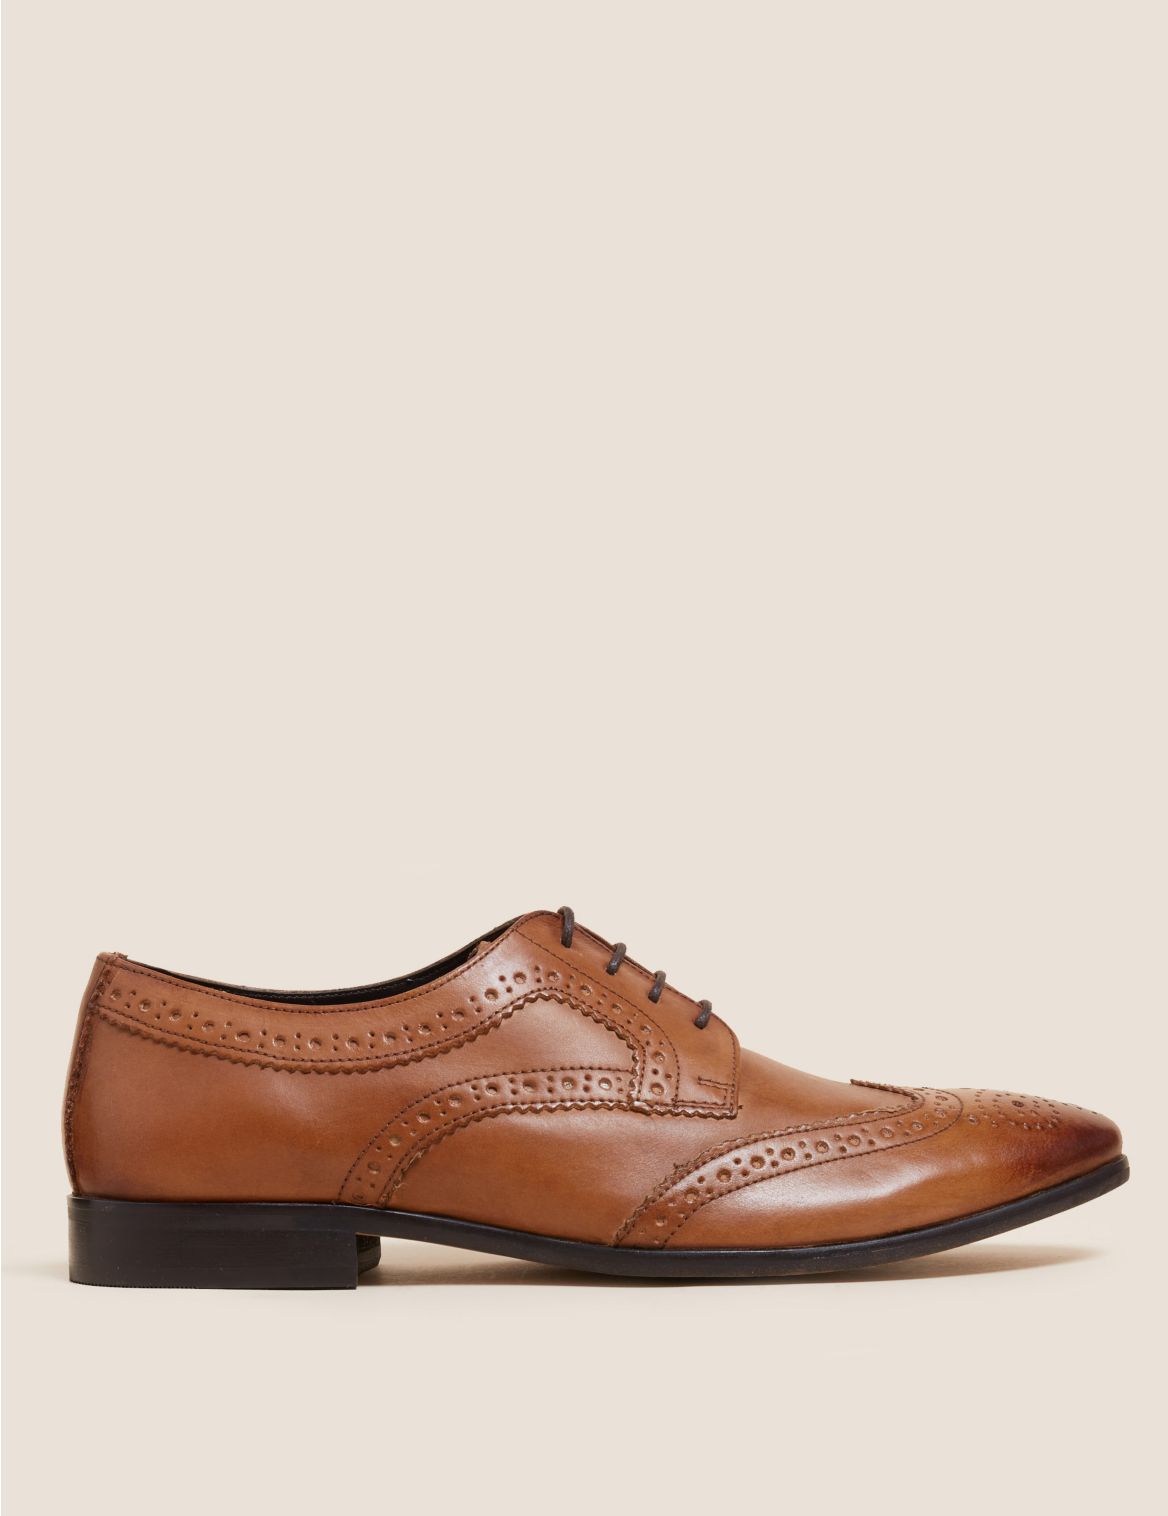 Leather Almond Toe Brogues brown